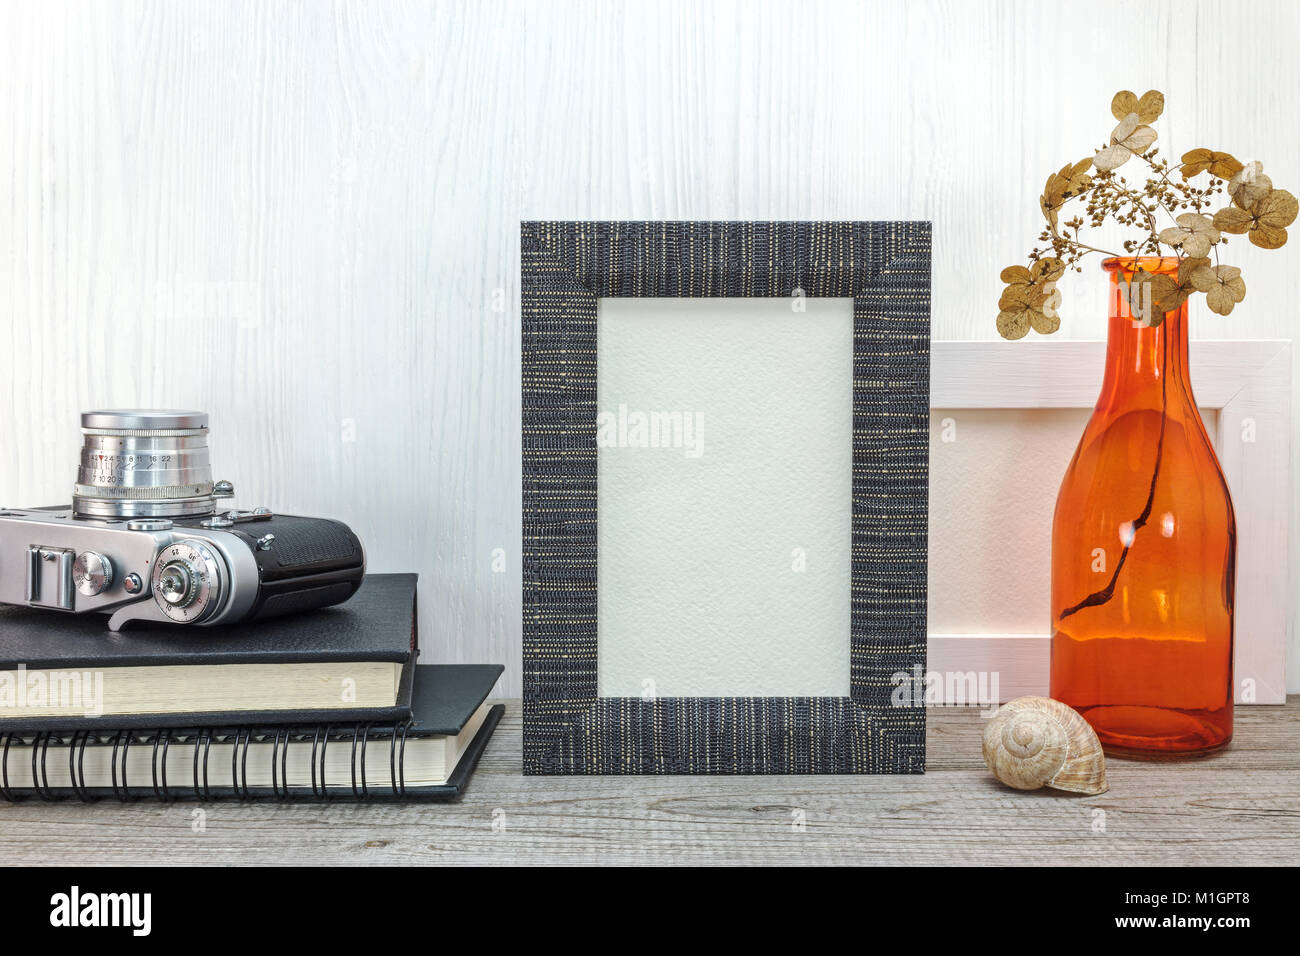 classic film camera, photo frame and red glass vase with dried flowers on wooden boards background Stock Photo